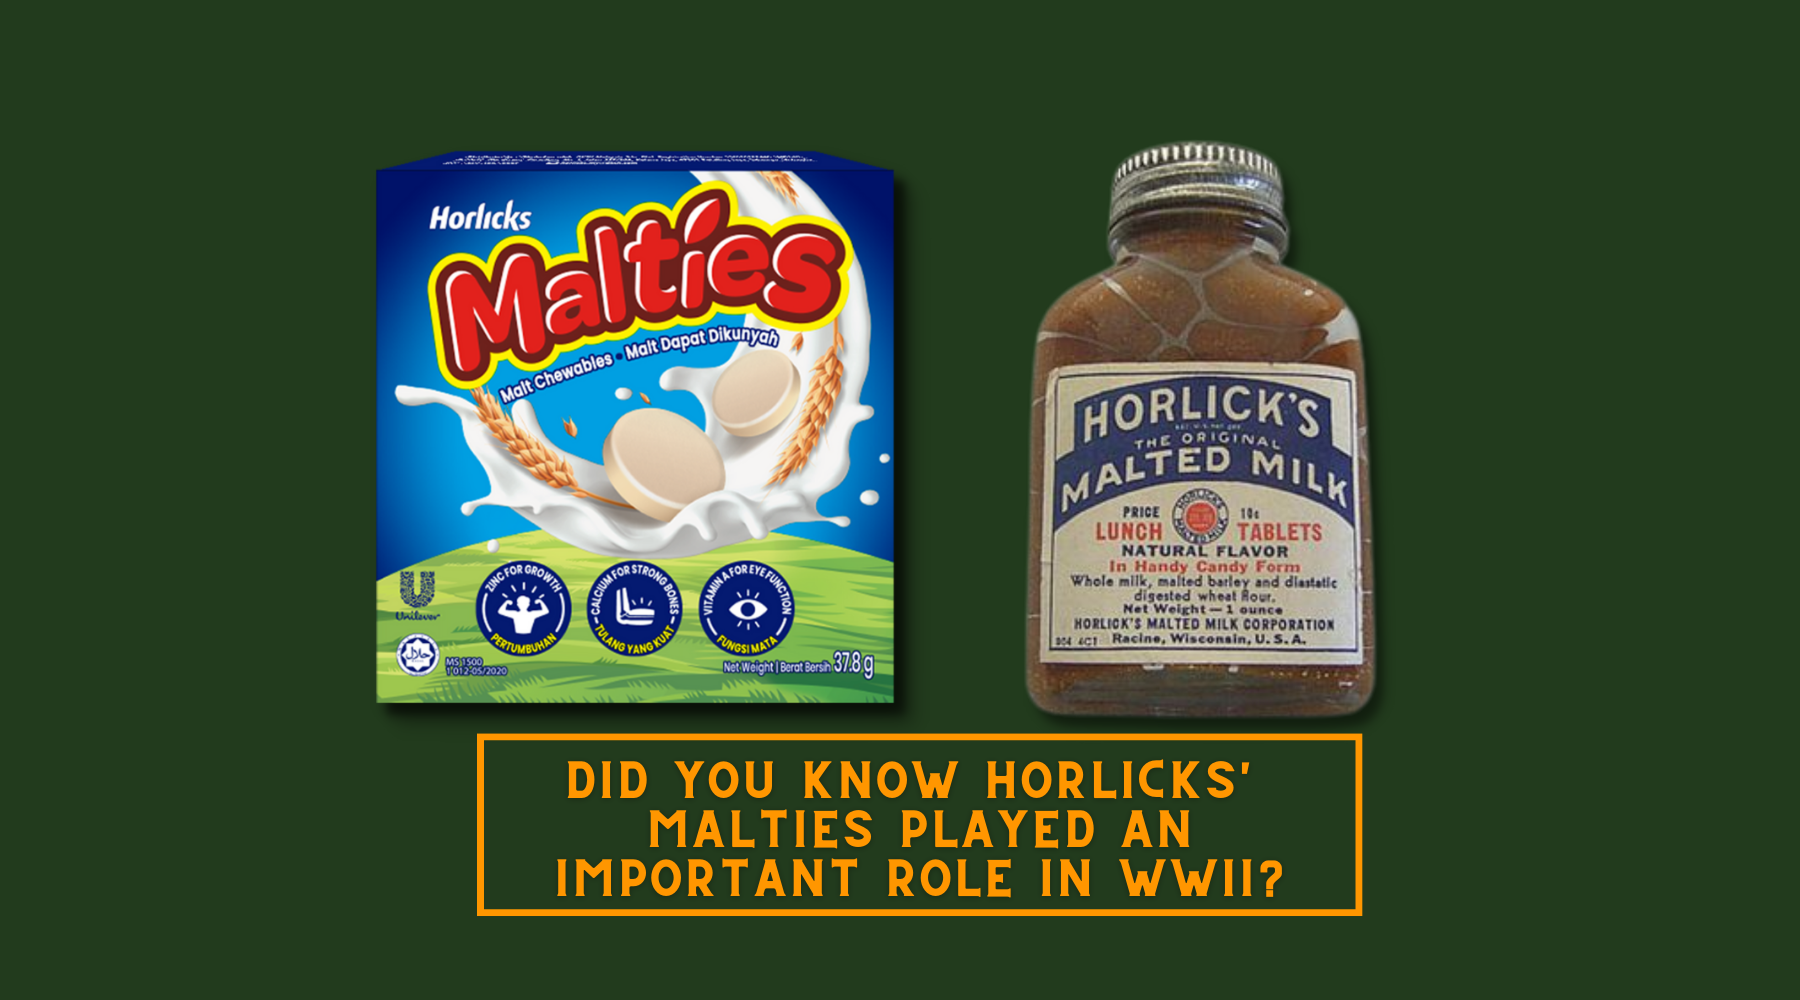 Did You Know Horlicks' Malties played an important role in World War II?